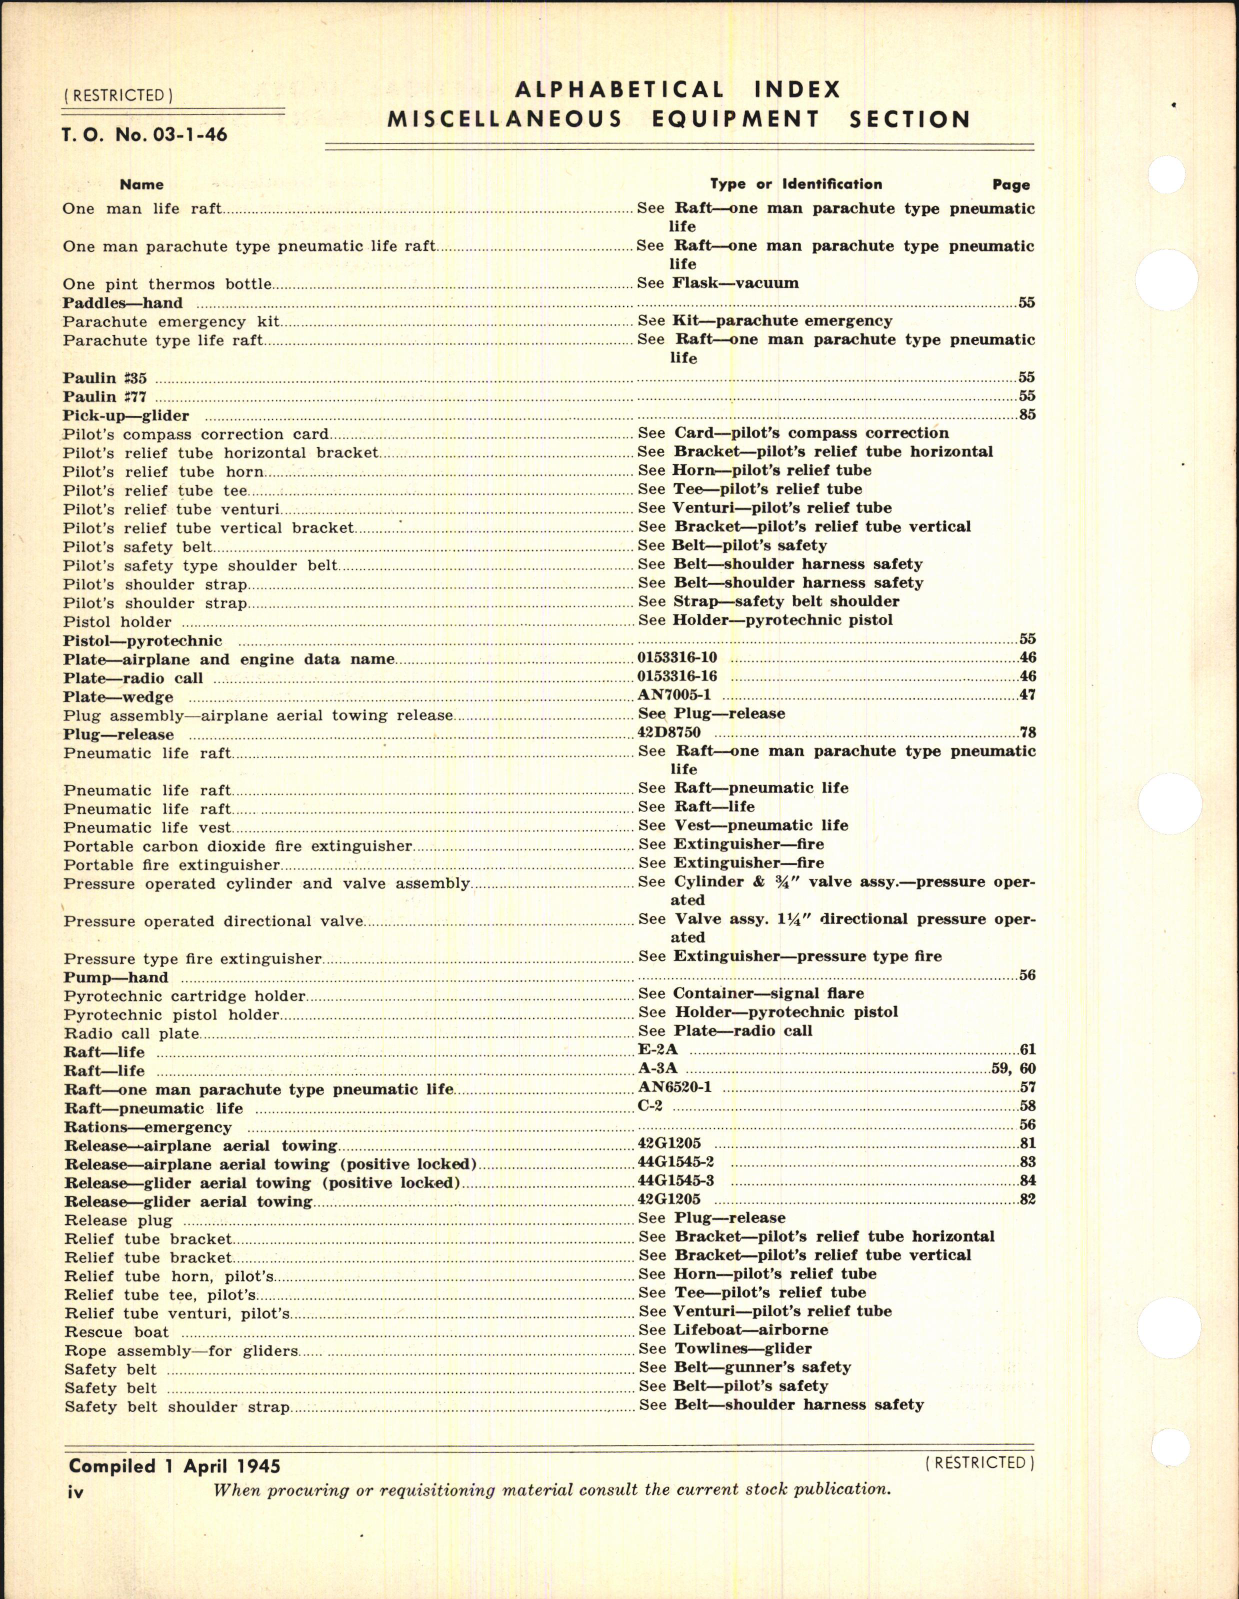 Sample page 6 from AirCorps Library document: Index of Army-Navy Aeronautical Equipment - Miscellaneous